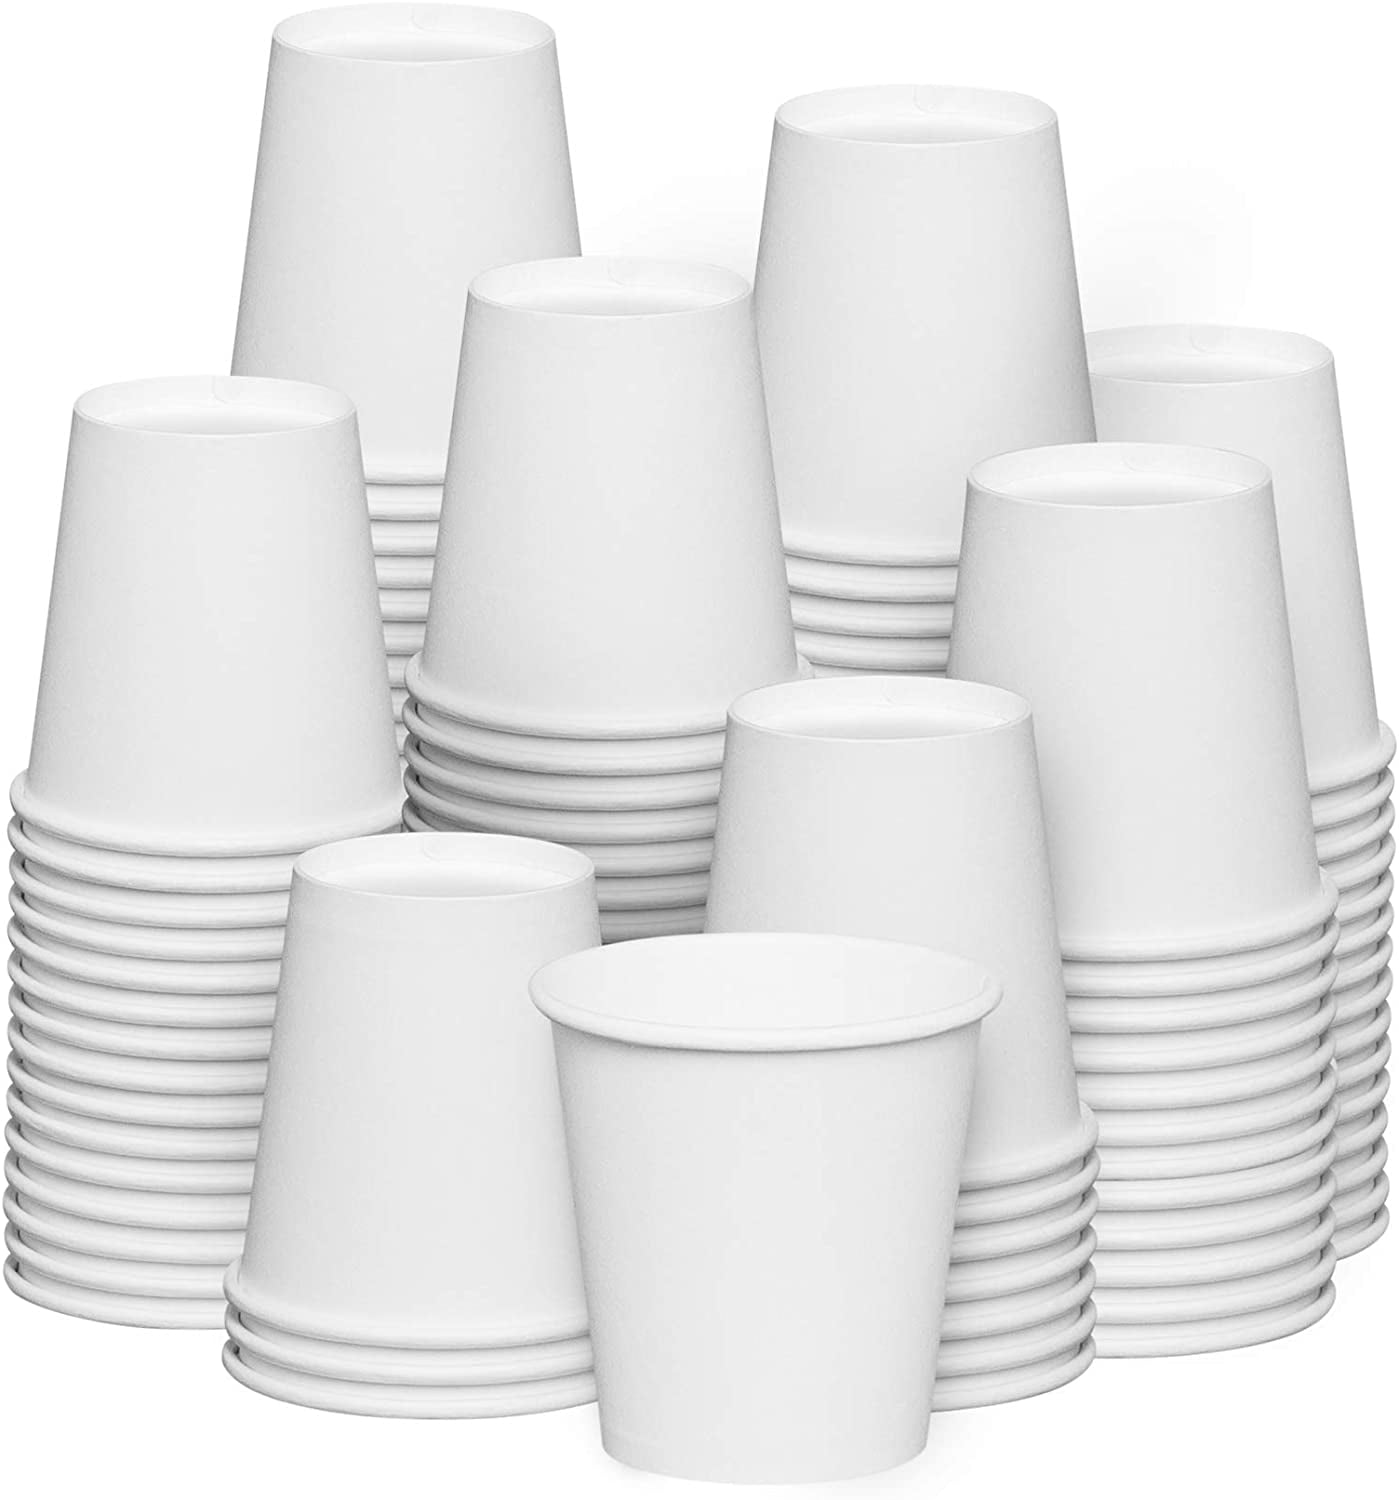 TV TOPVALUE 600pack 3oz Disposable Paper Cups Colorful Paper